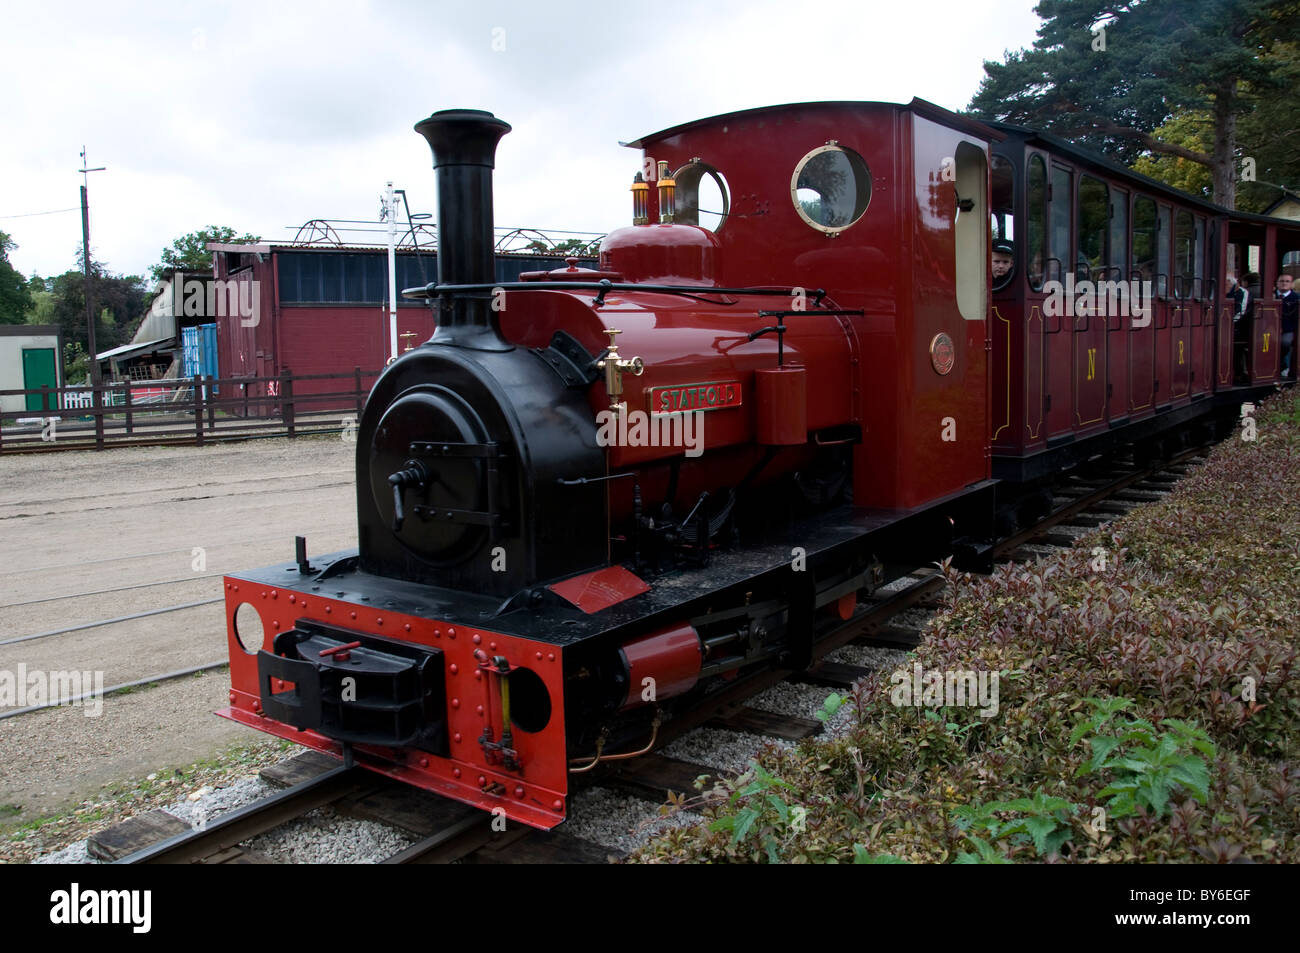 Small steam locomotive at Bressingham Steam Museum in Norfolk, England. Stock Photo